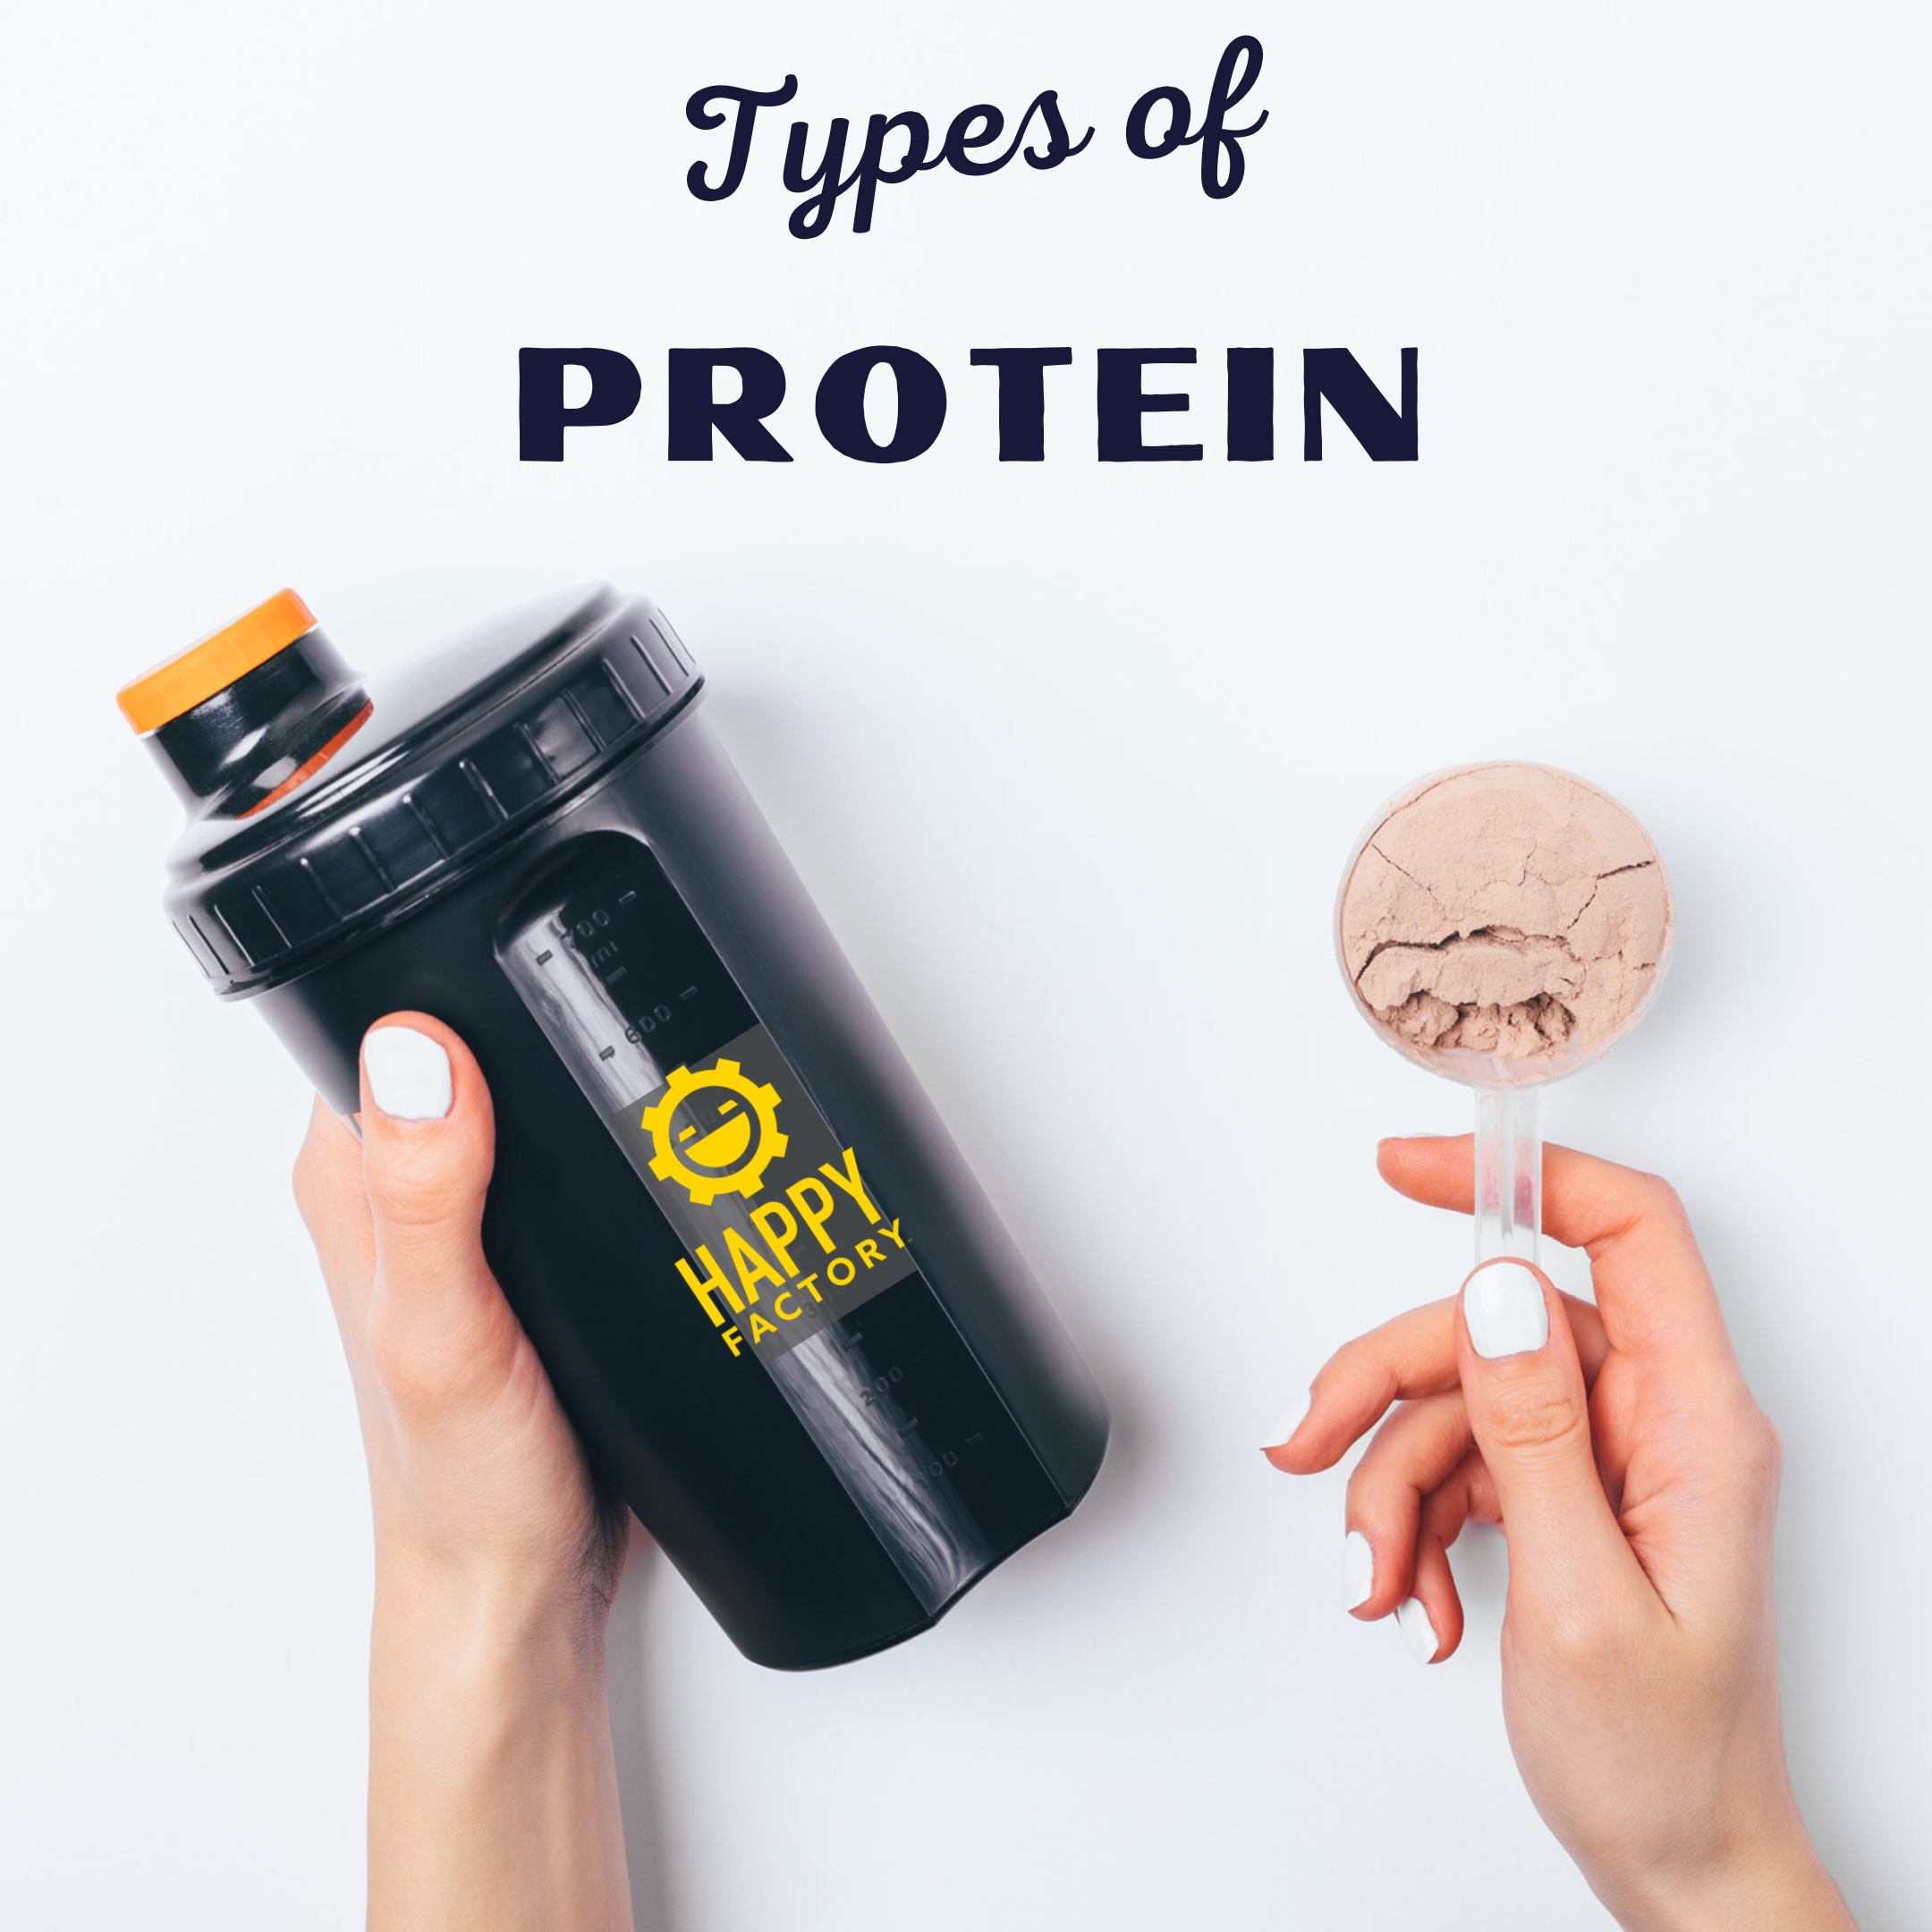 Types of Protein